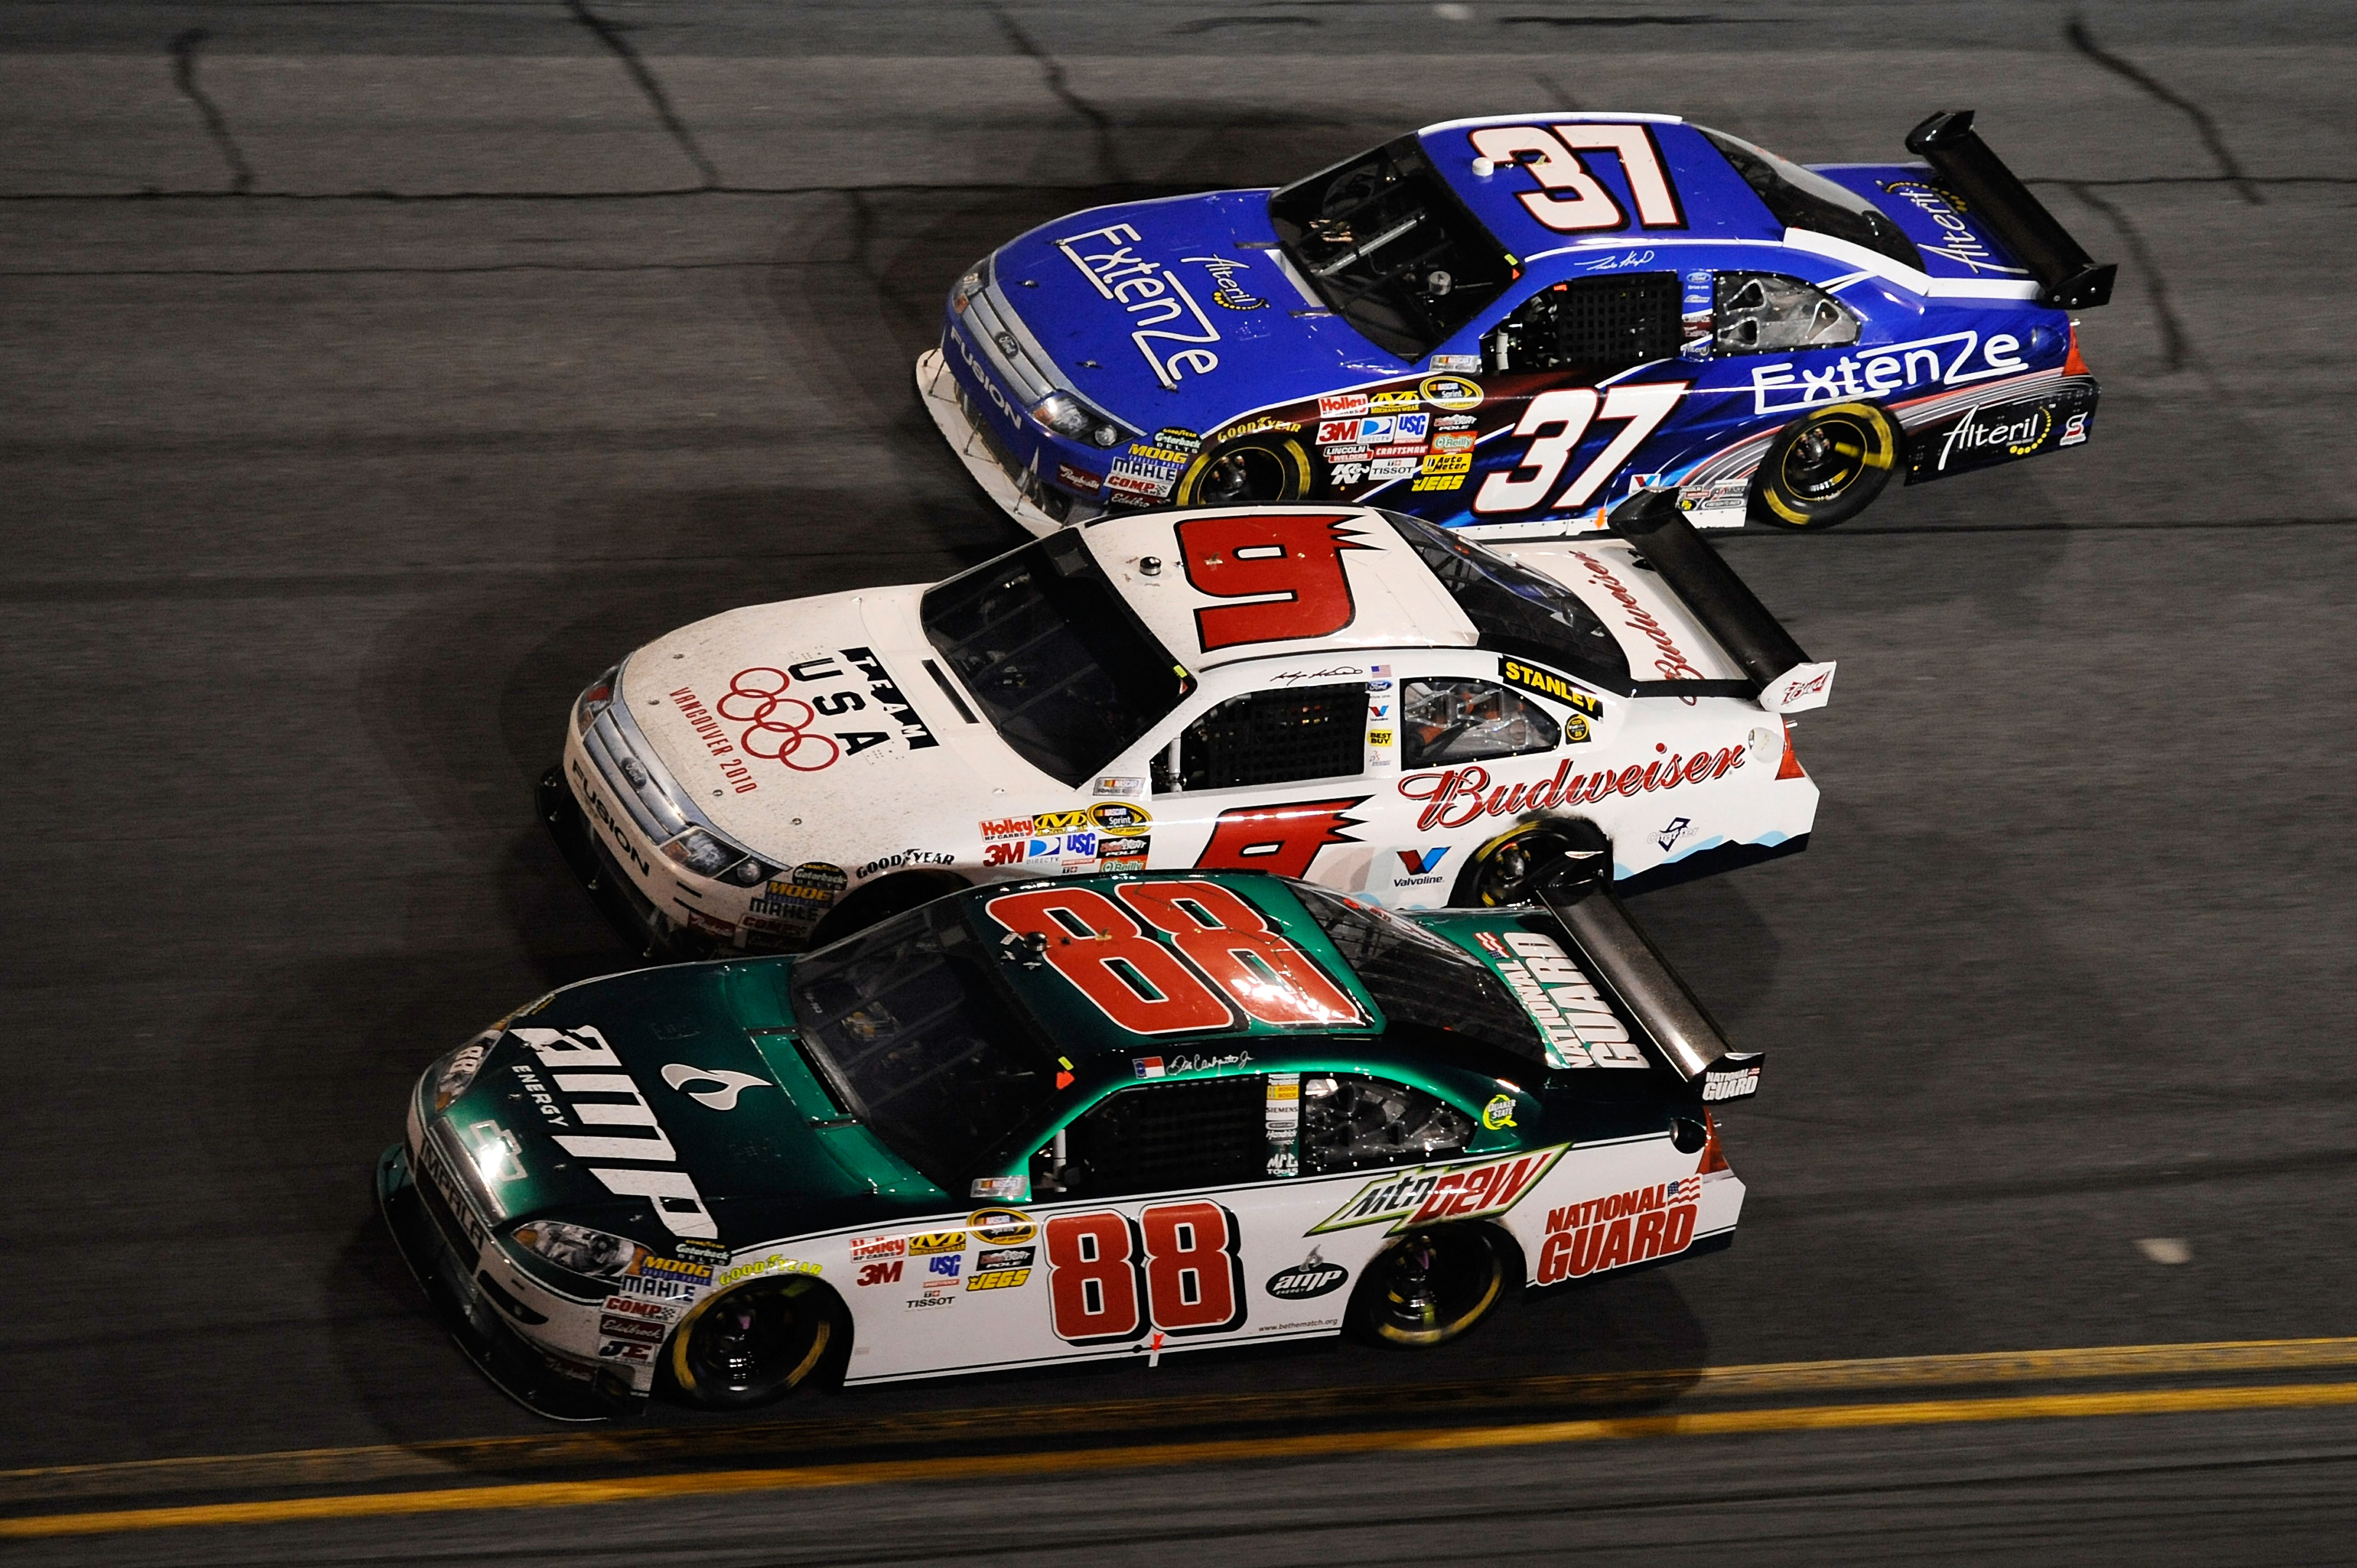 DAYTONA BEACH, FL - FEBRUARY 14:  Dale Earnhardt Jr., driver of the #88 AMP Energy/National Guard Chevrolet, races Kasey Kahne, driver of the #9 Budweiser Ford, and Travis Kvapil, driver of the #37 Extenze Ford, during the NASCAR Sprint Cup Series Daytona